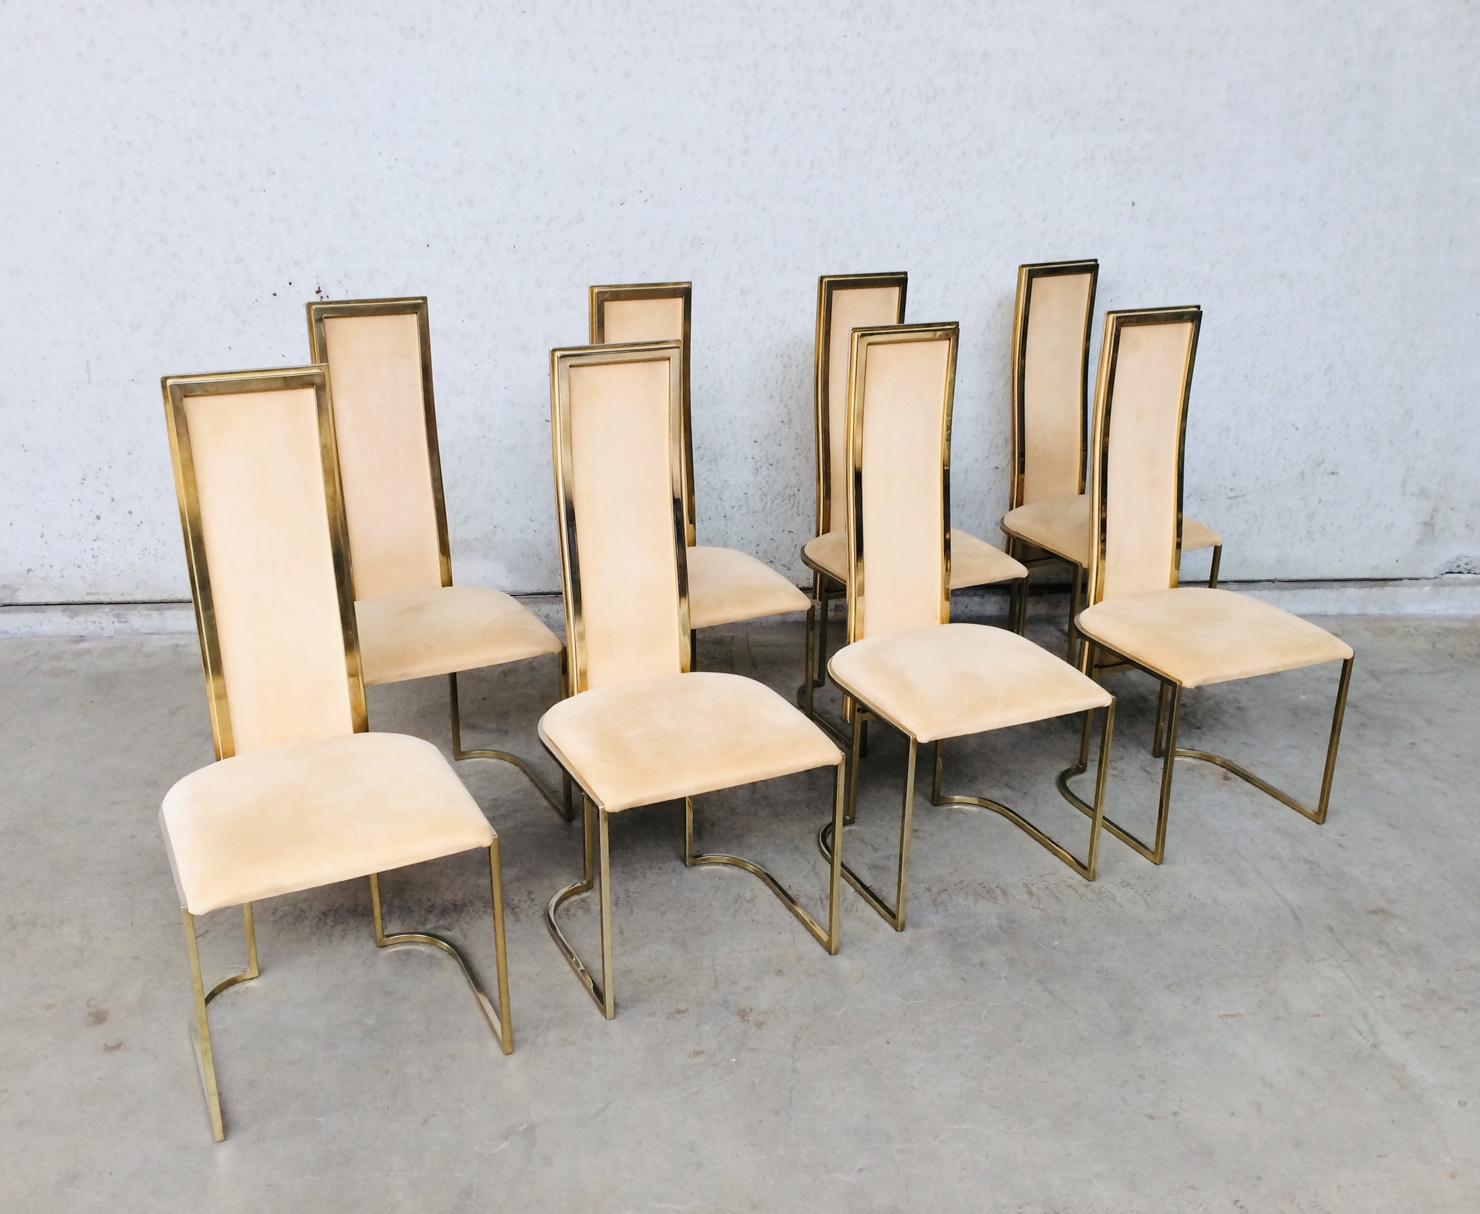 Vintage Postmodern Design Hollywood Regency Style set of 8 dining chairs by Belgo Chrom. Attributed to Willy Rizzo. Made in Belgium for Belgochrom in the 1970's. Velor velvet seating and back with gold plated metal frame. All seats and backs are in